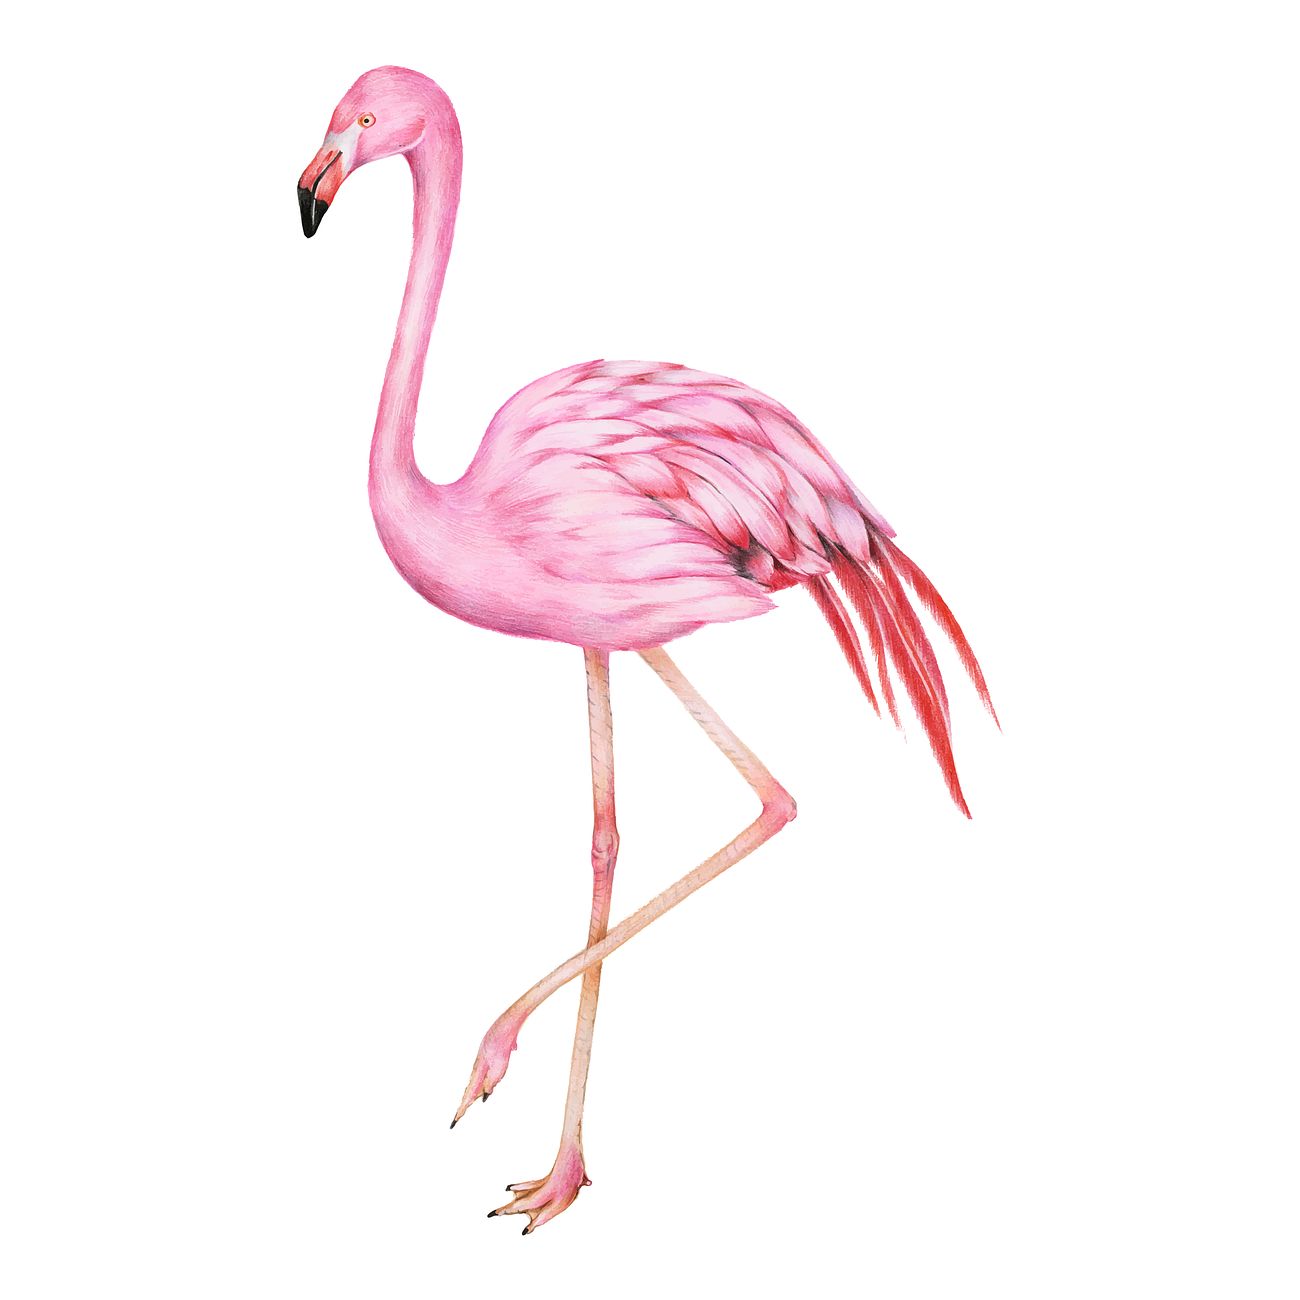 Download Illustration of pink flamingo watercolor style | Royalty ...